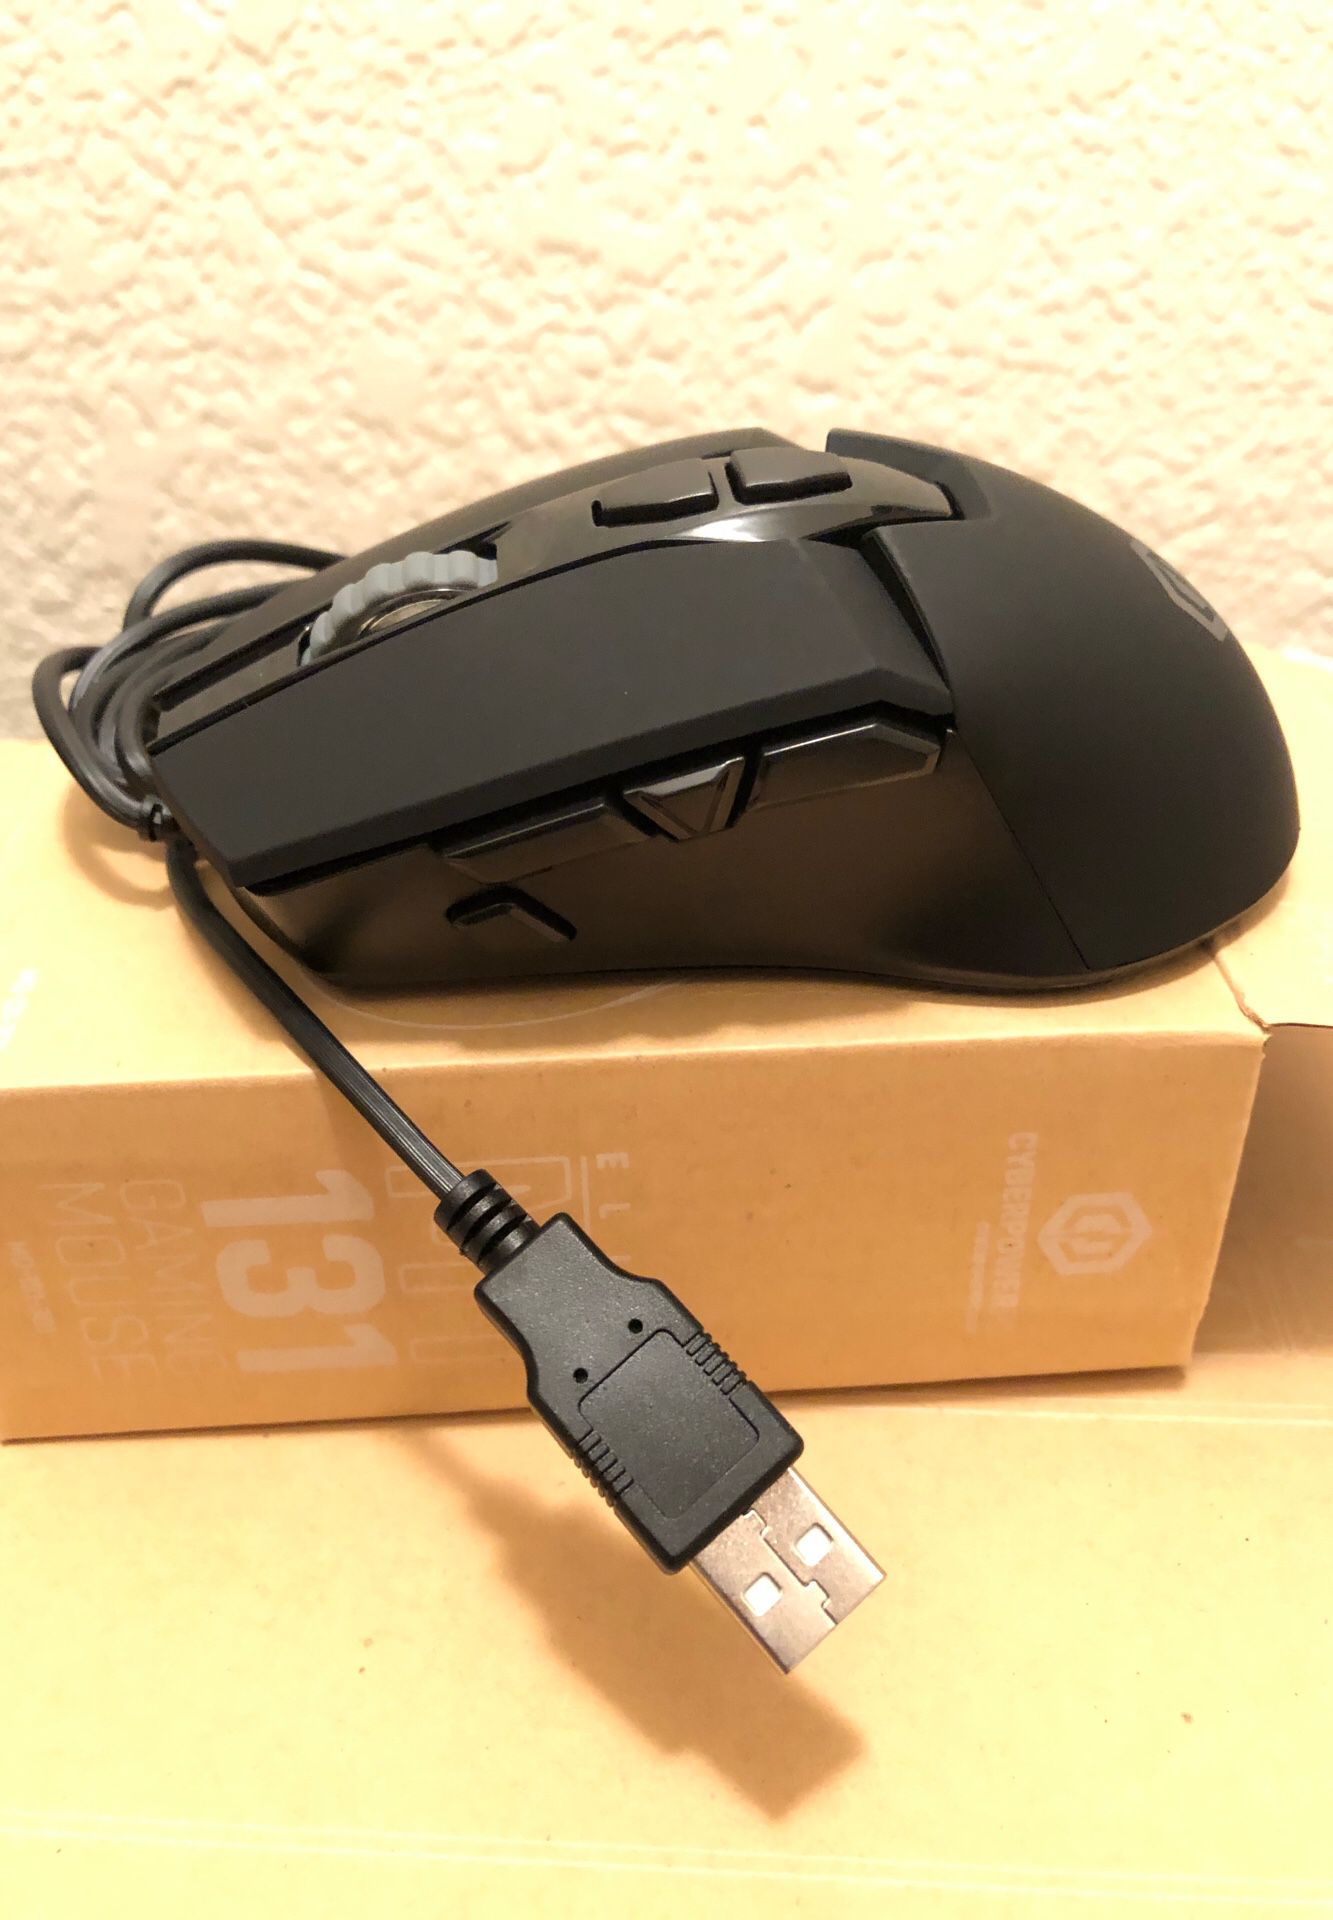 cyberpower elite m1 131 mouse software